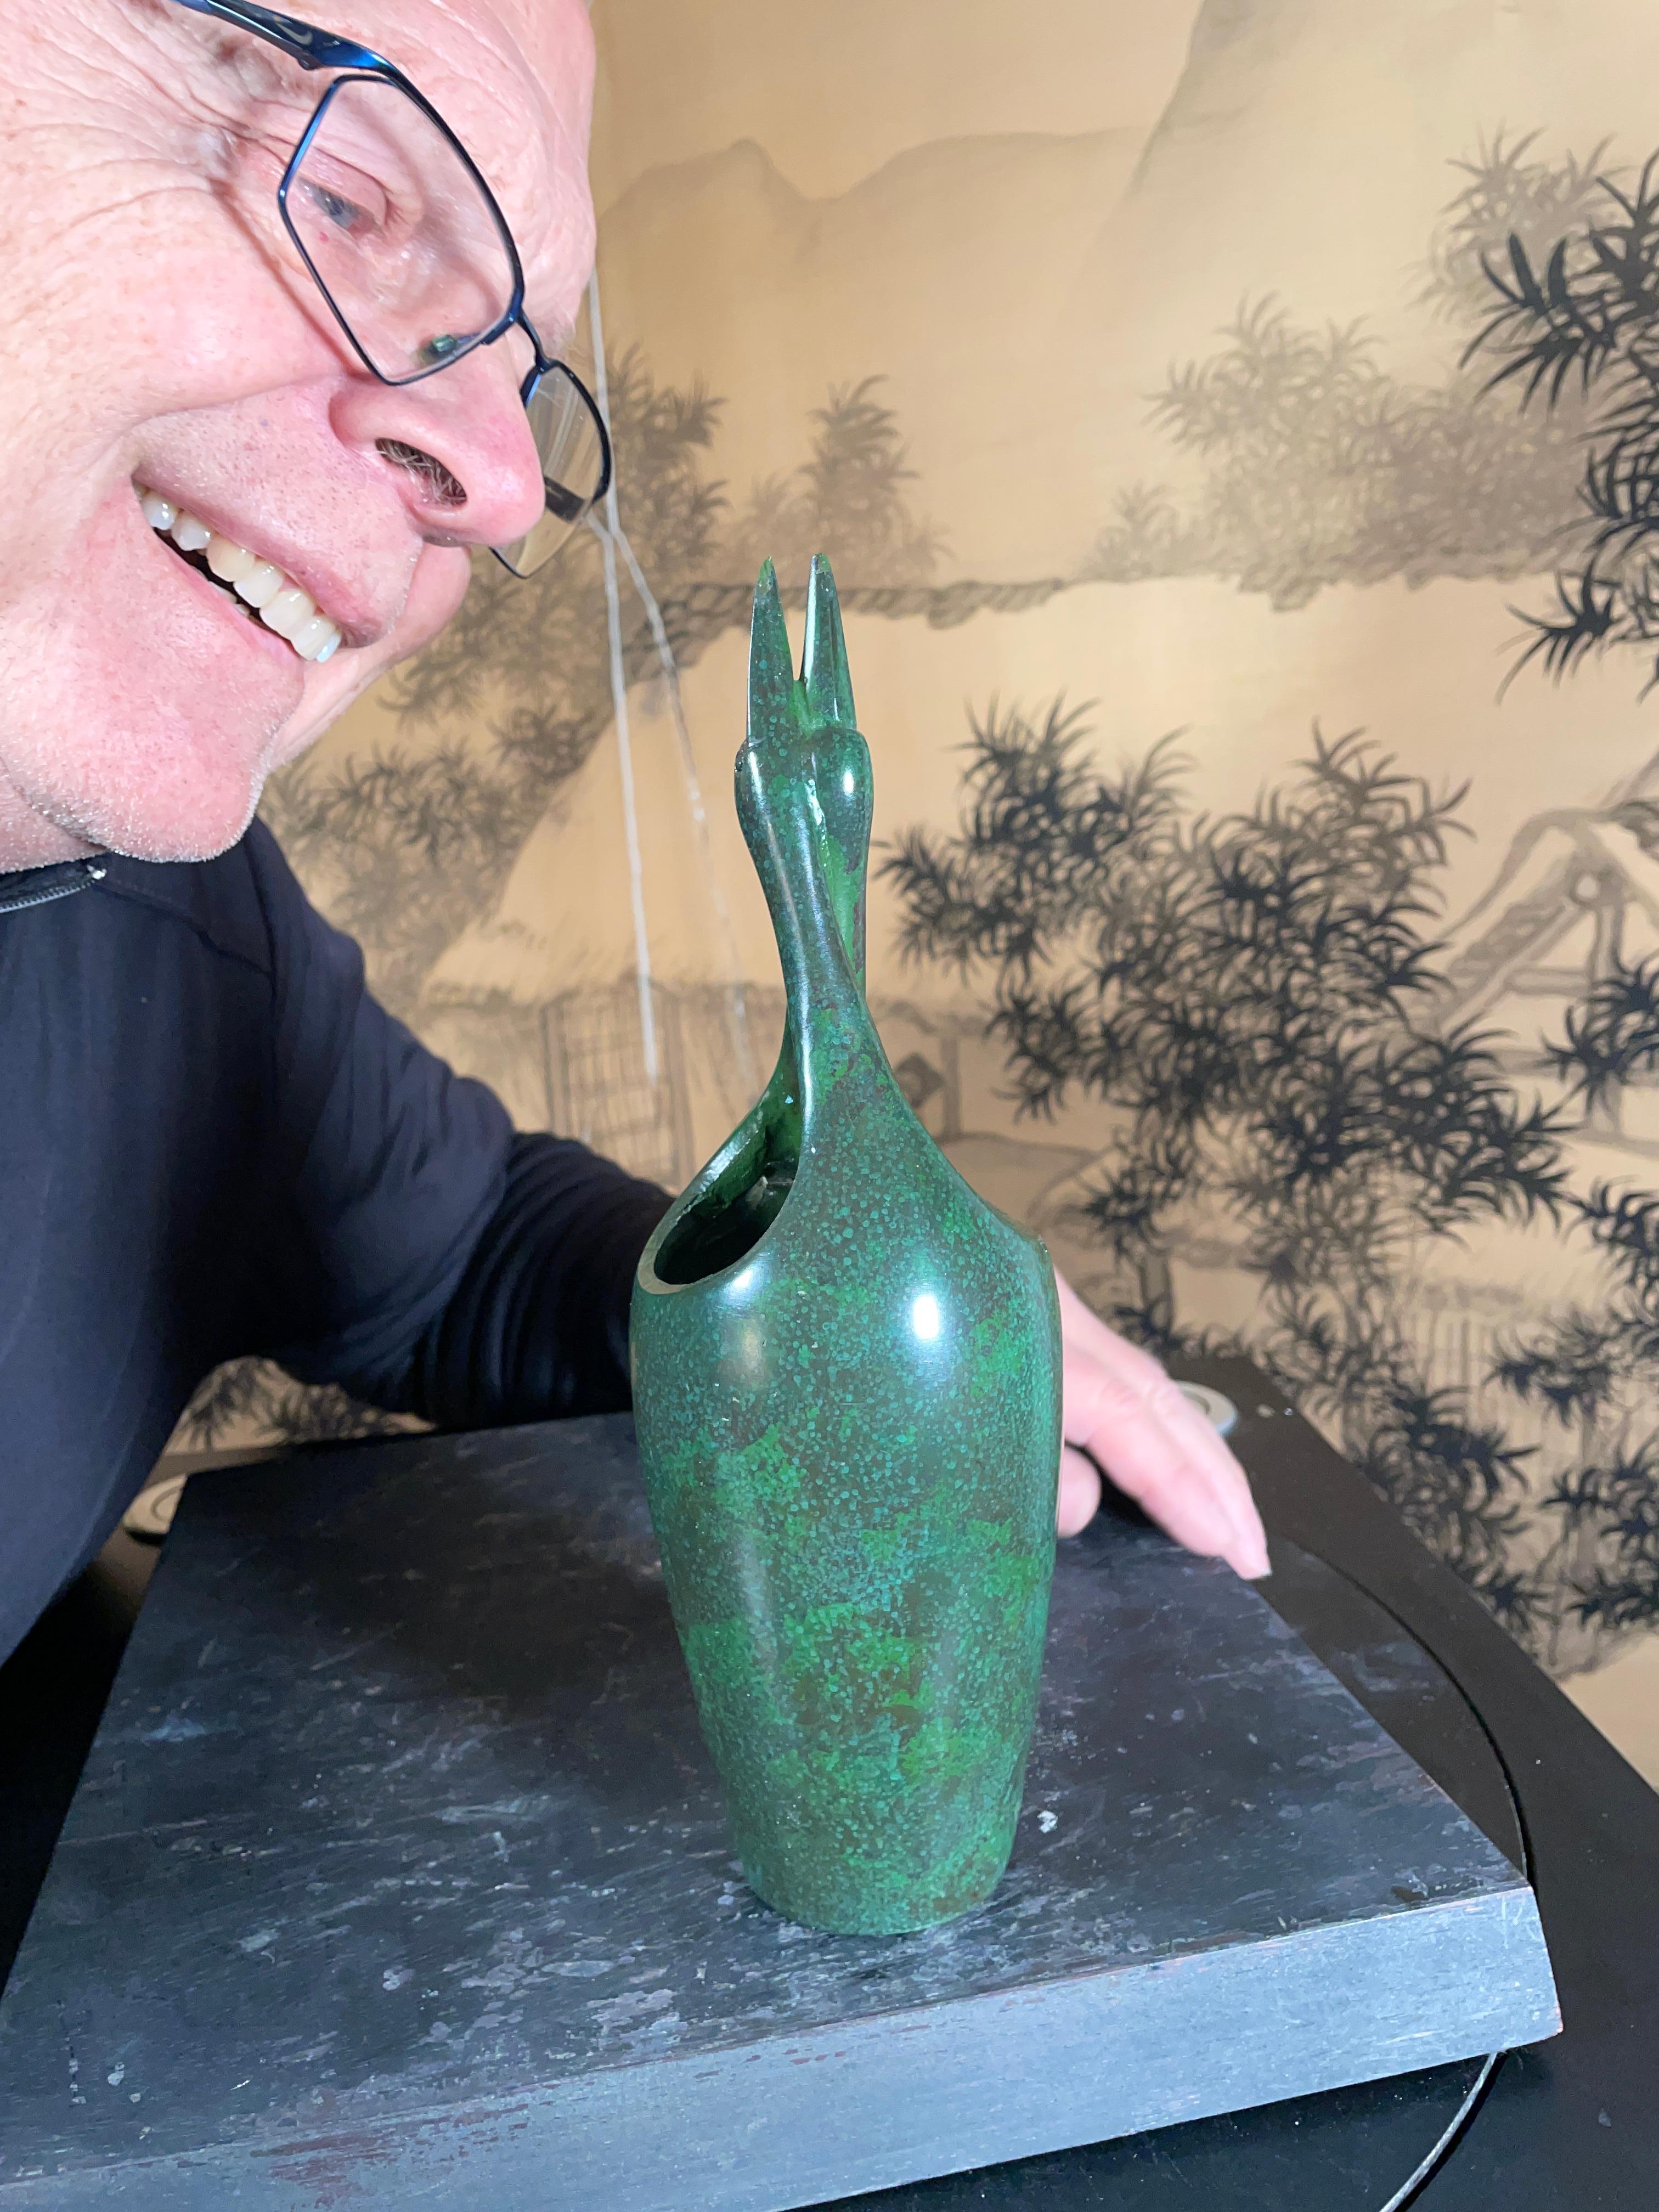 From Our Recent Japanese Acquisitions

From Japan comes this beautiful hand cast bronze mating or double cranes bud vase with an attractive green finish. It comes complete with its original signed collector storage box tomobako. This vase is in